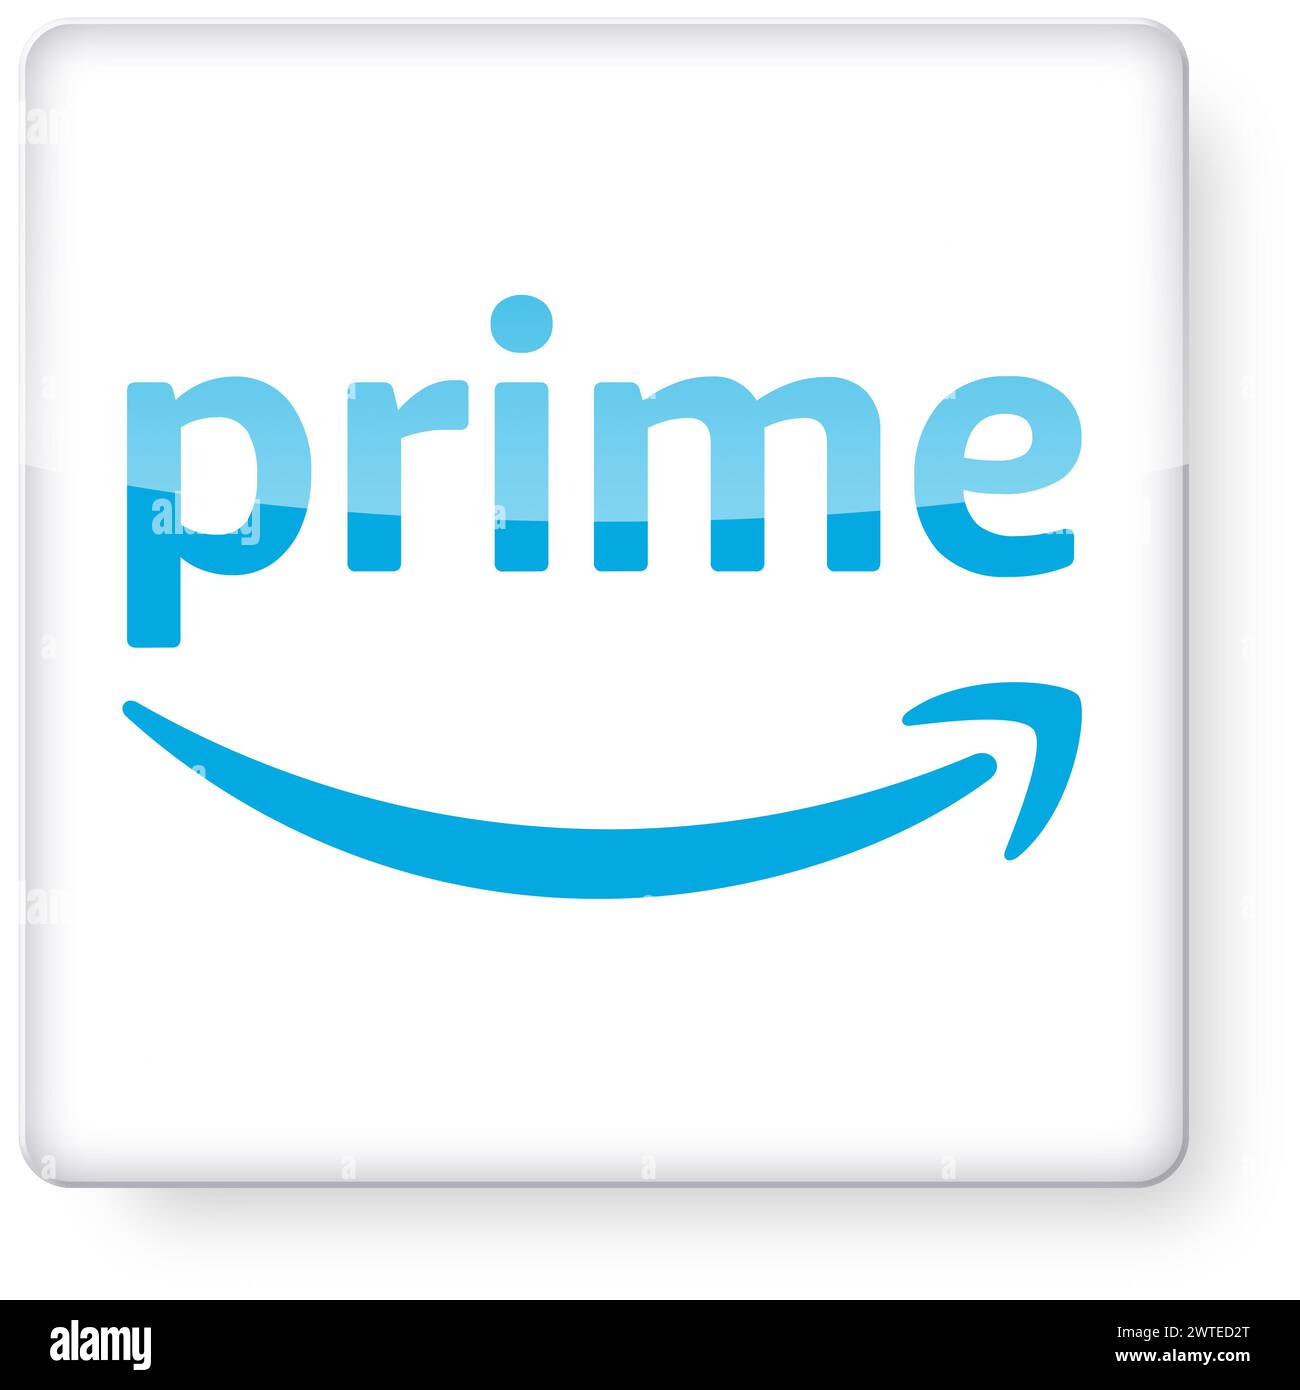 Amazon prime logo as an app icon. Clipping path included. Stock Photo